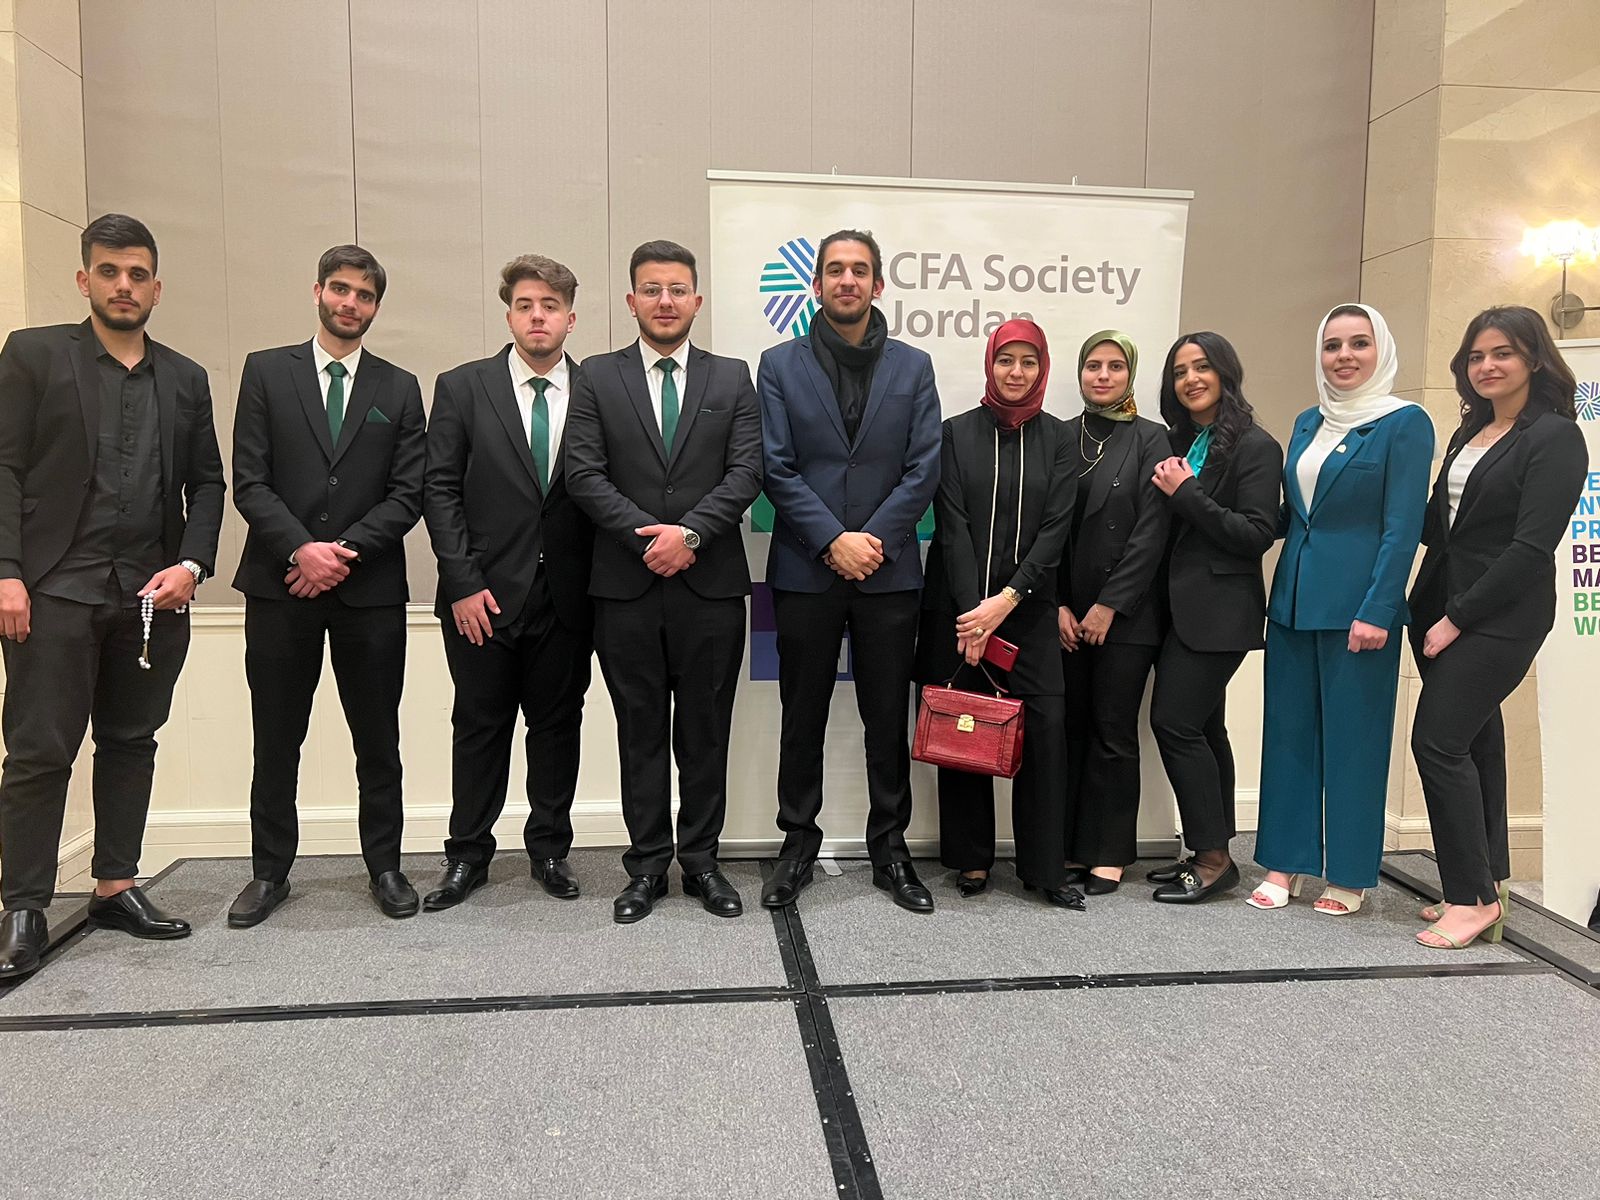 The Business Faculty Team Qualifies for the Second Stage in the International Competition for the Chartered Financial Analyst